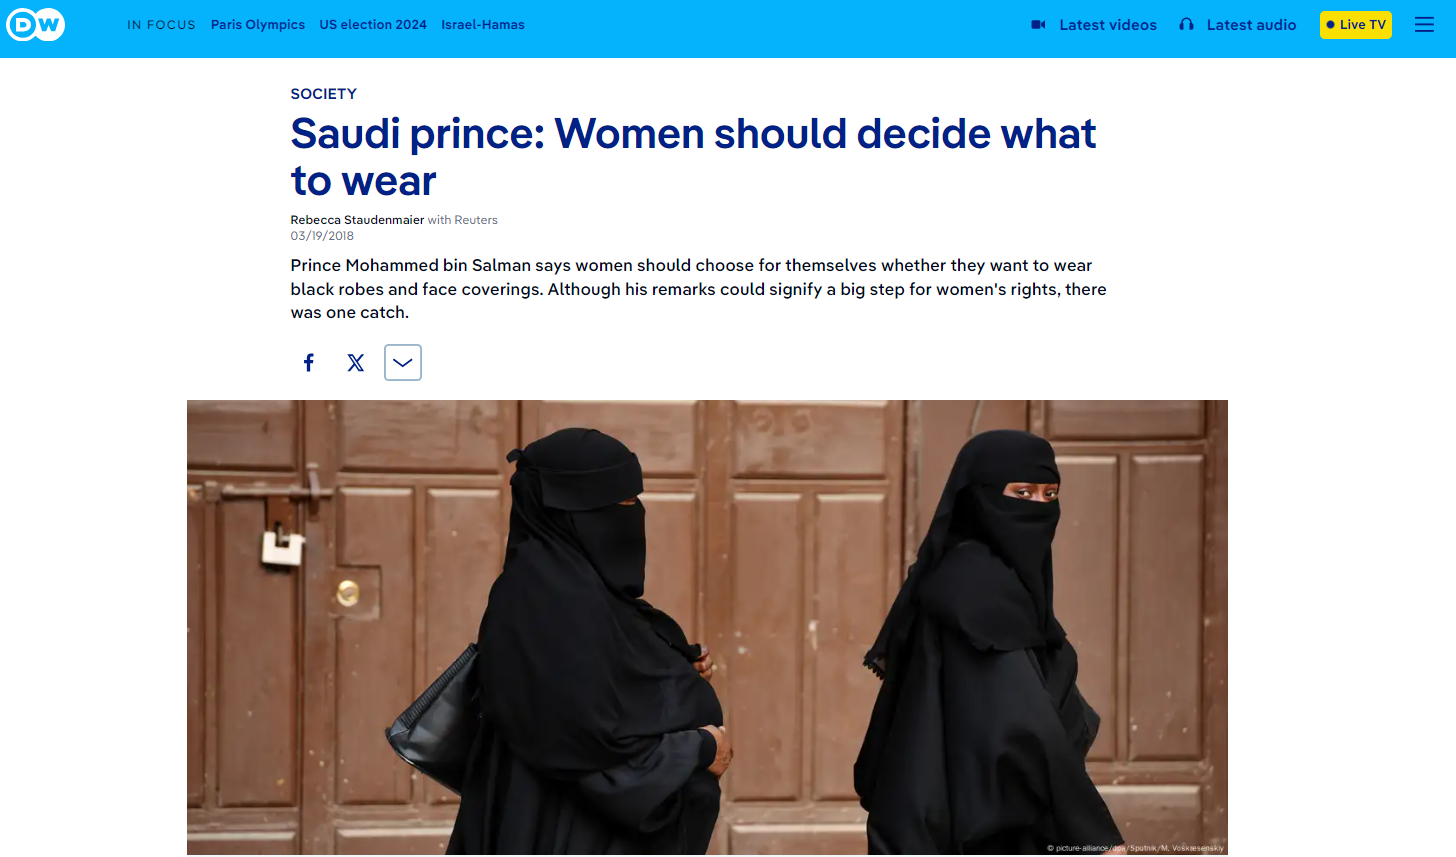 Women should decide what to wear